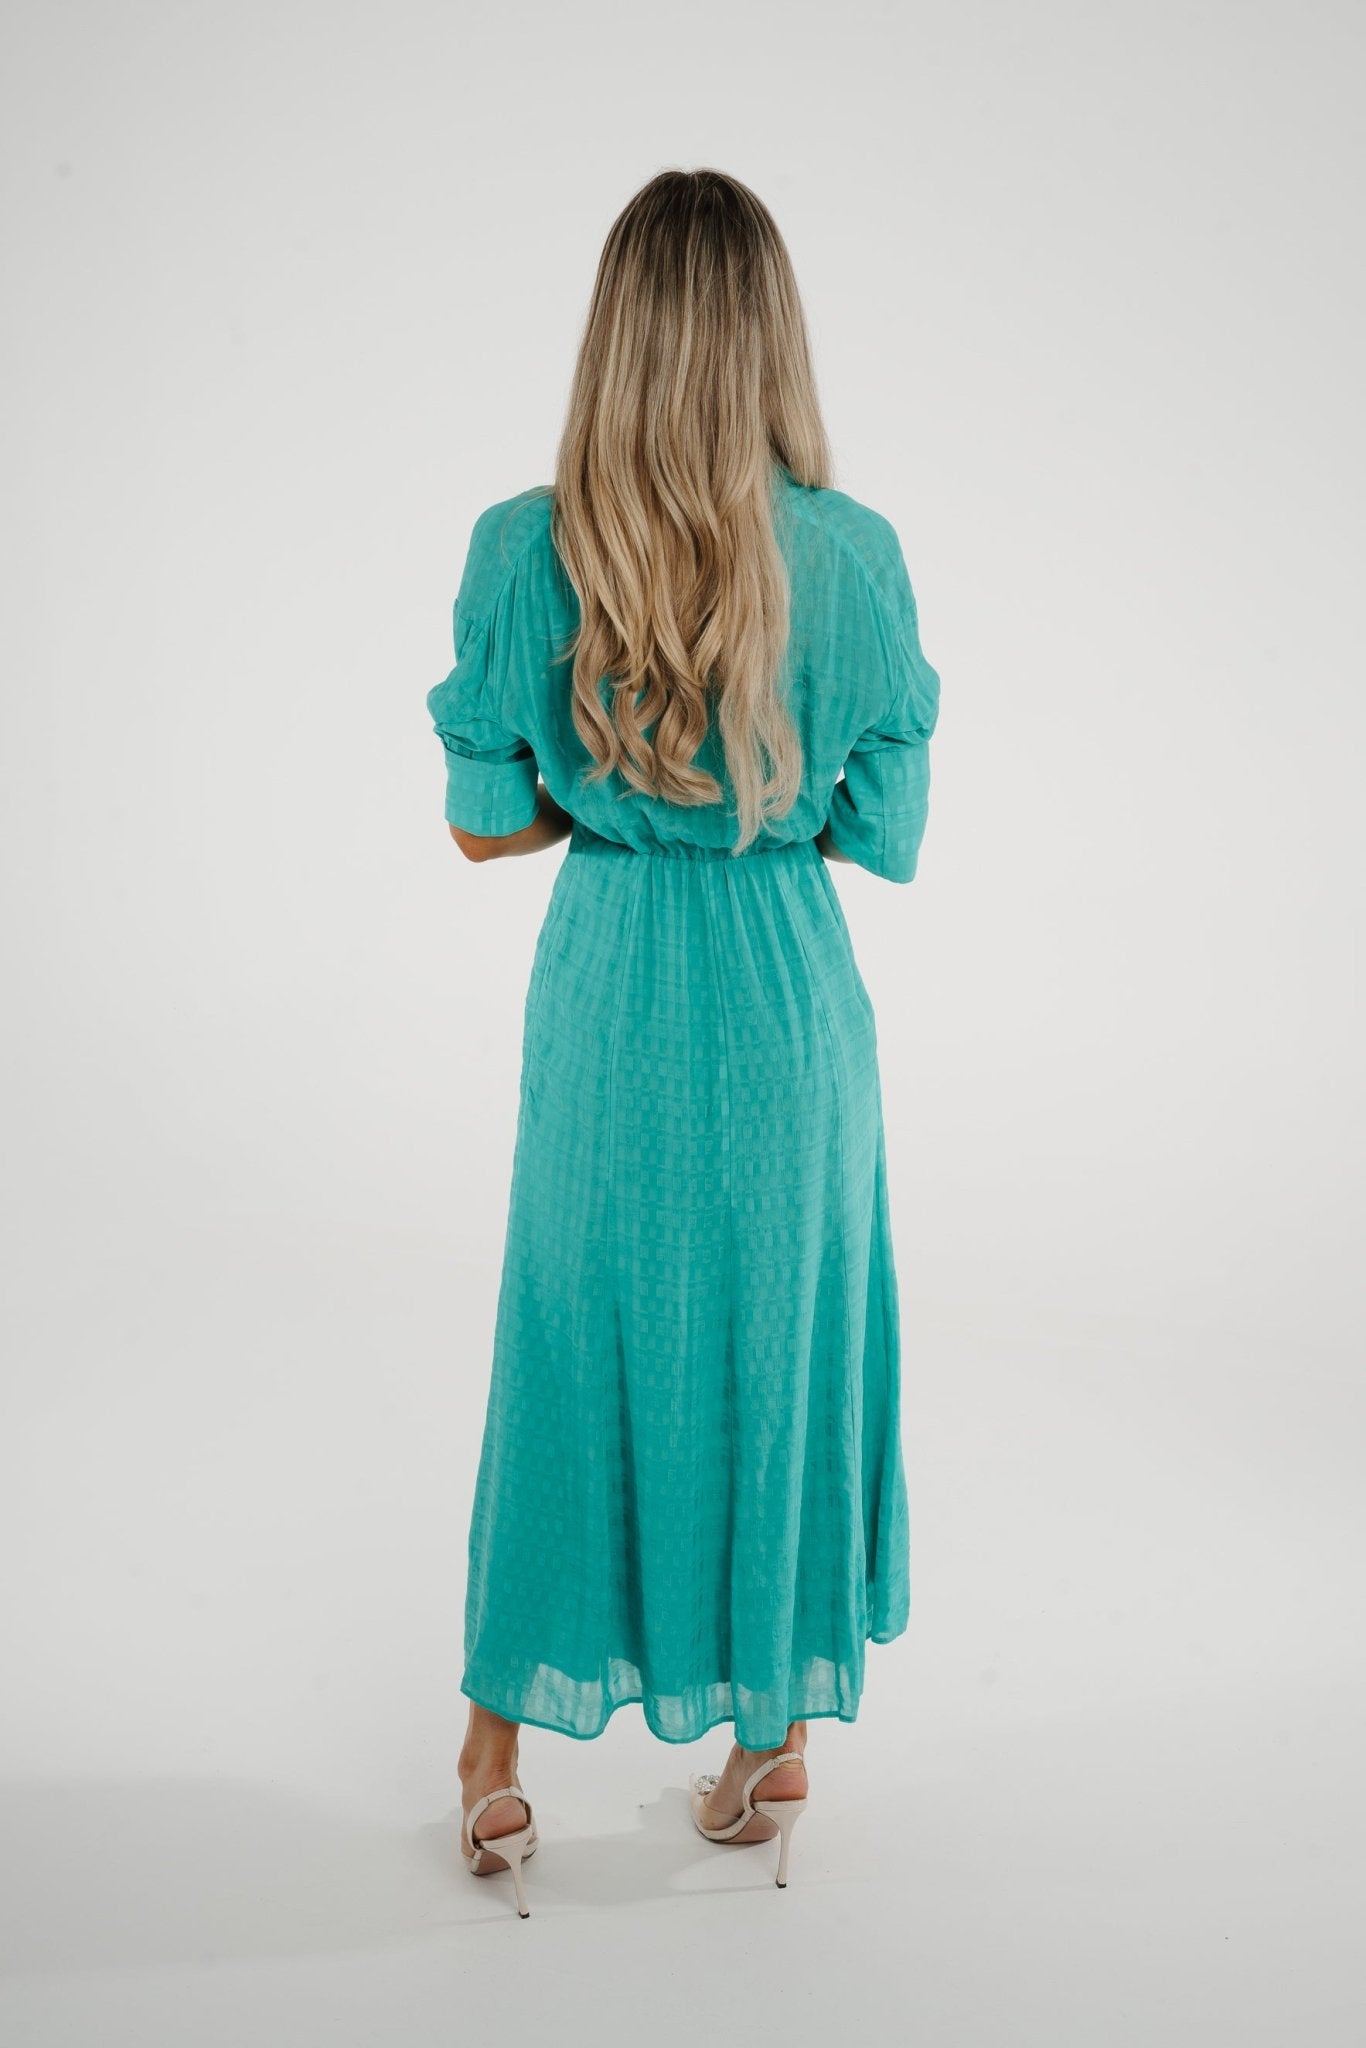 Kayla Button Front Dress In Turquoise - The Walk in Wardrobe